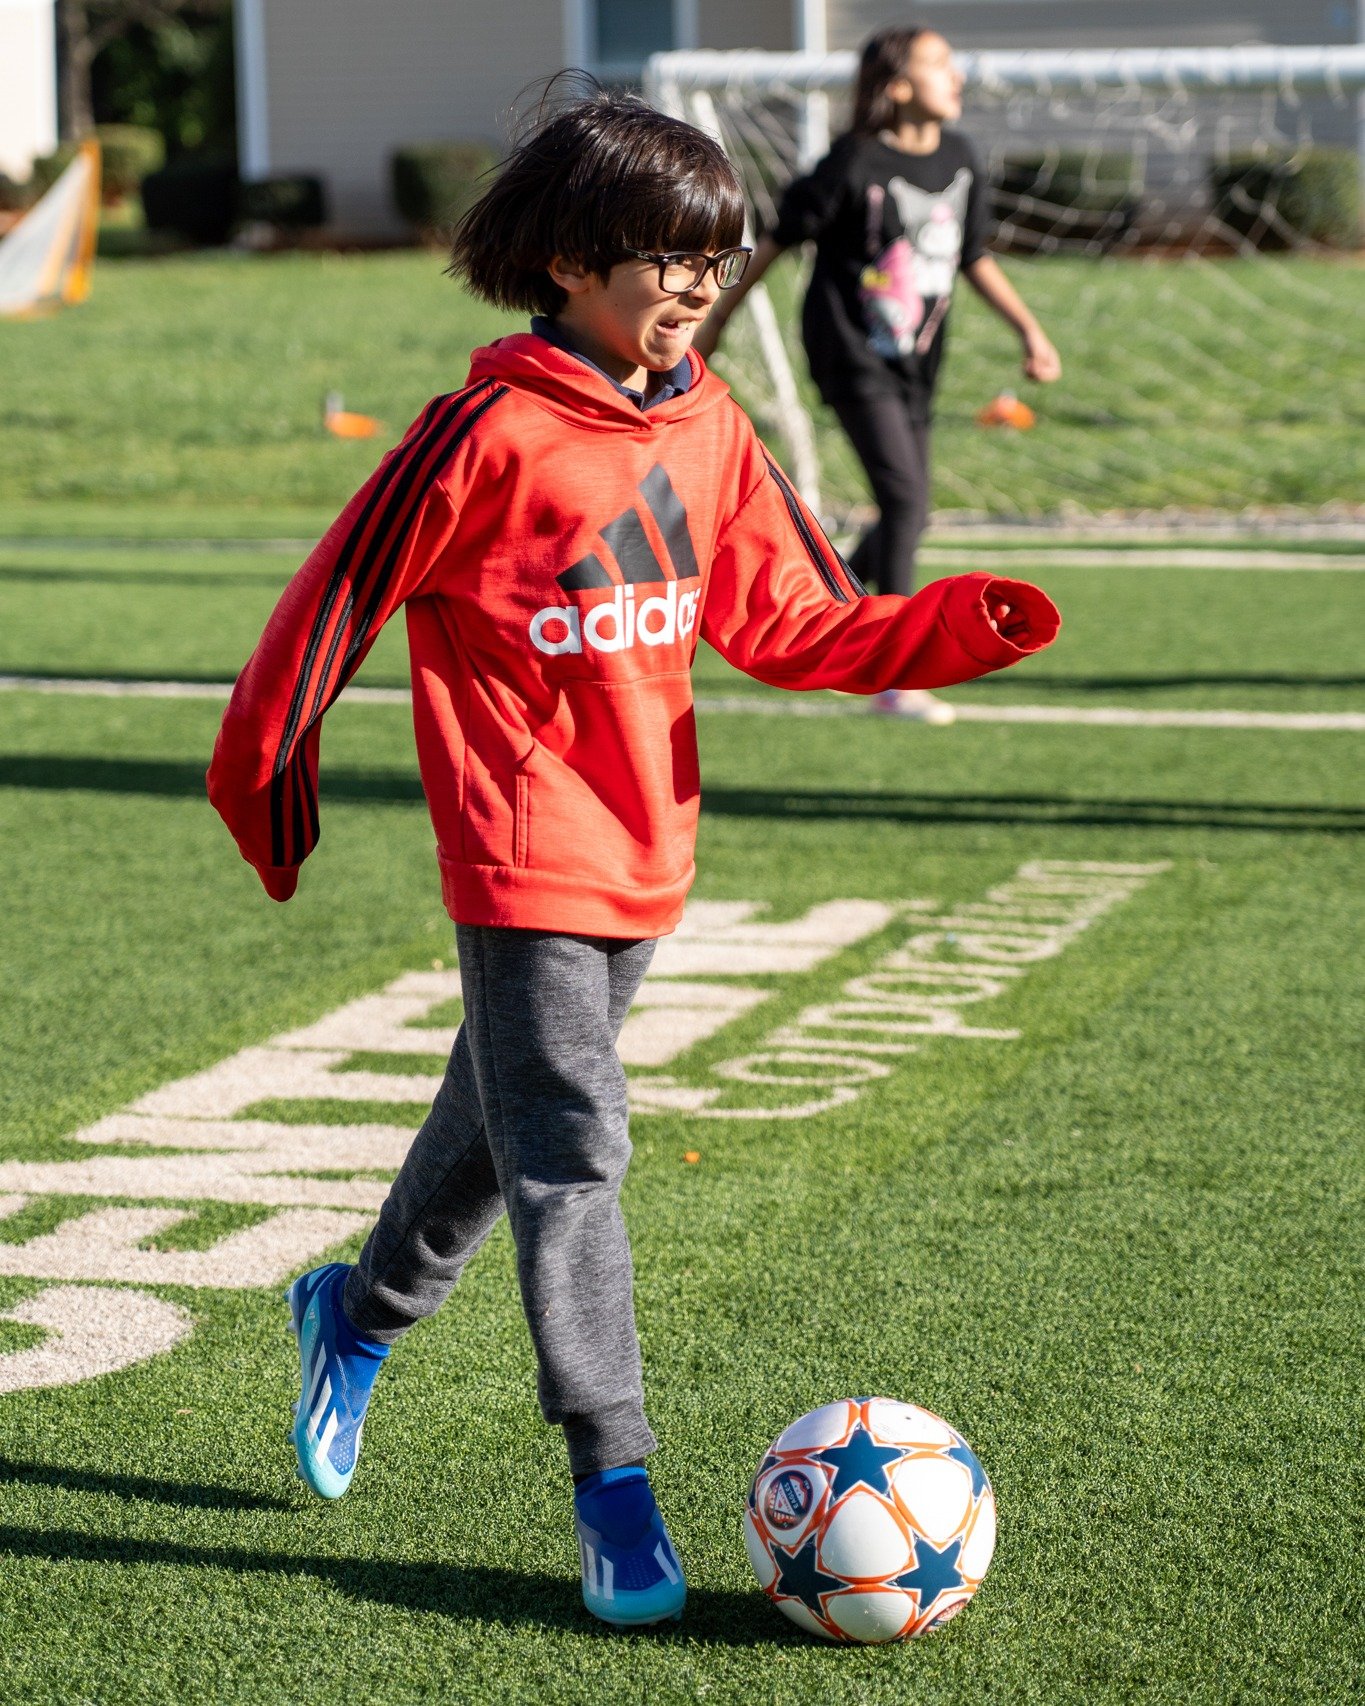 There's nothing like spring soccer! ⚽☀ Some moments from Neighborhood Academy in the North.

#SoliDeoGloria